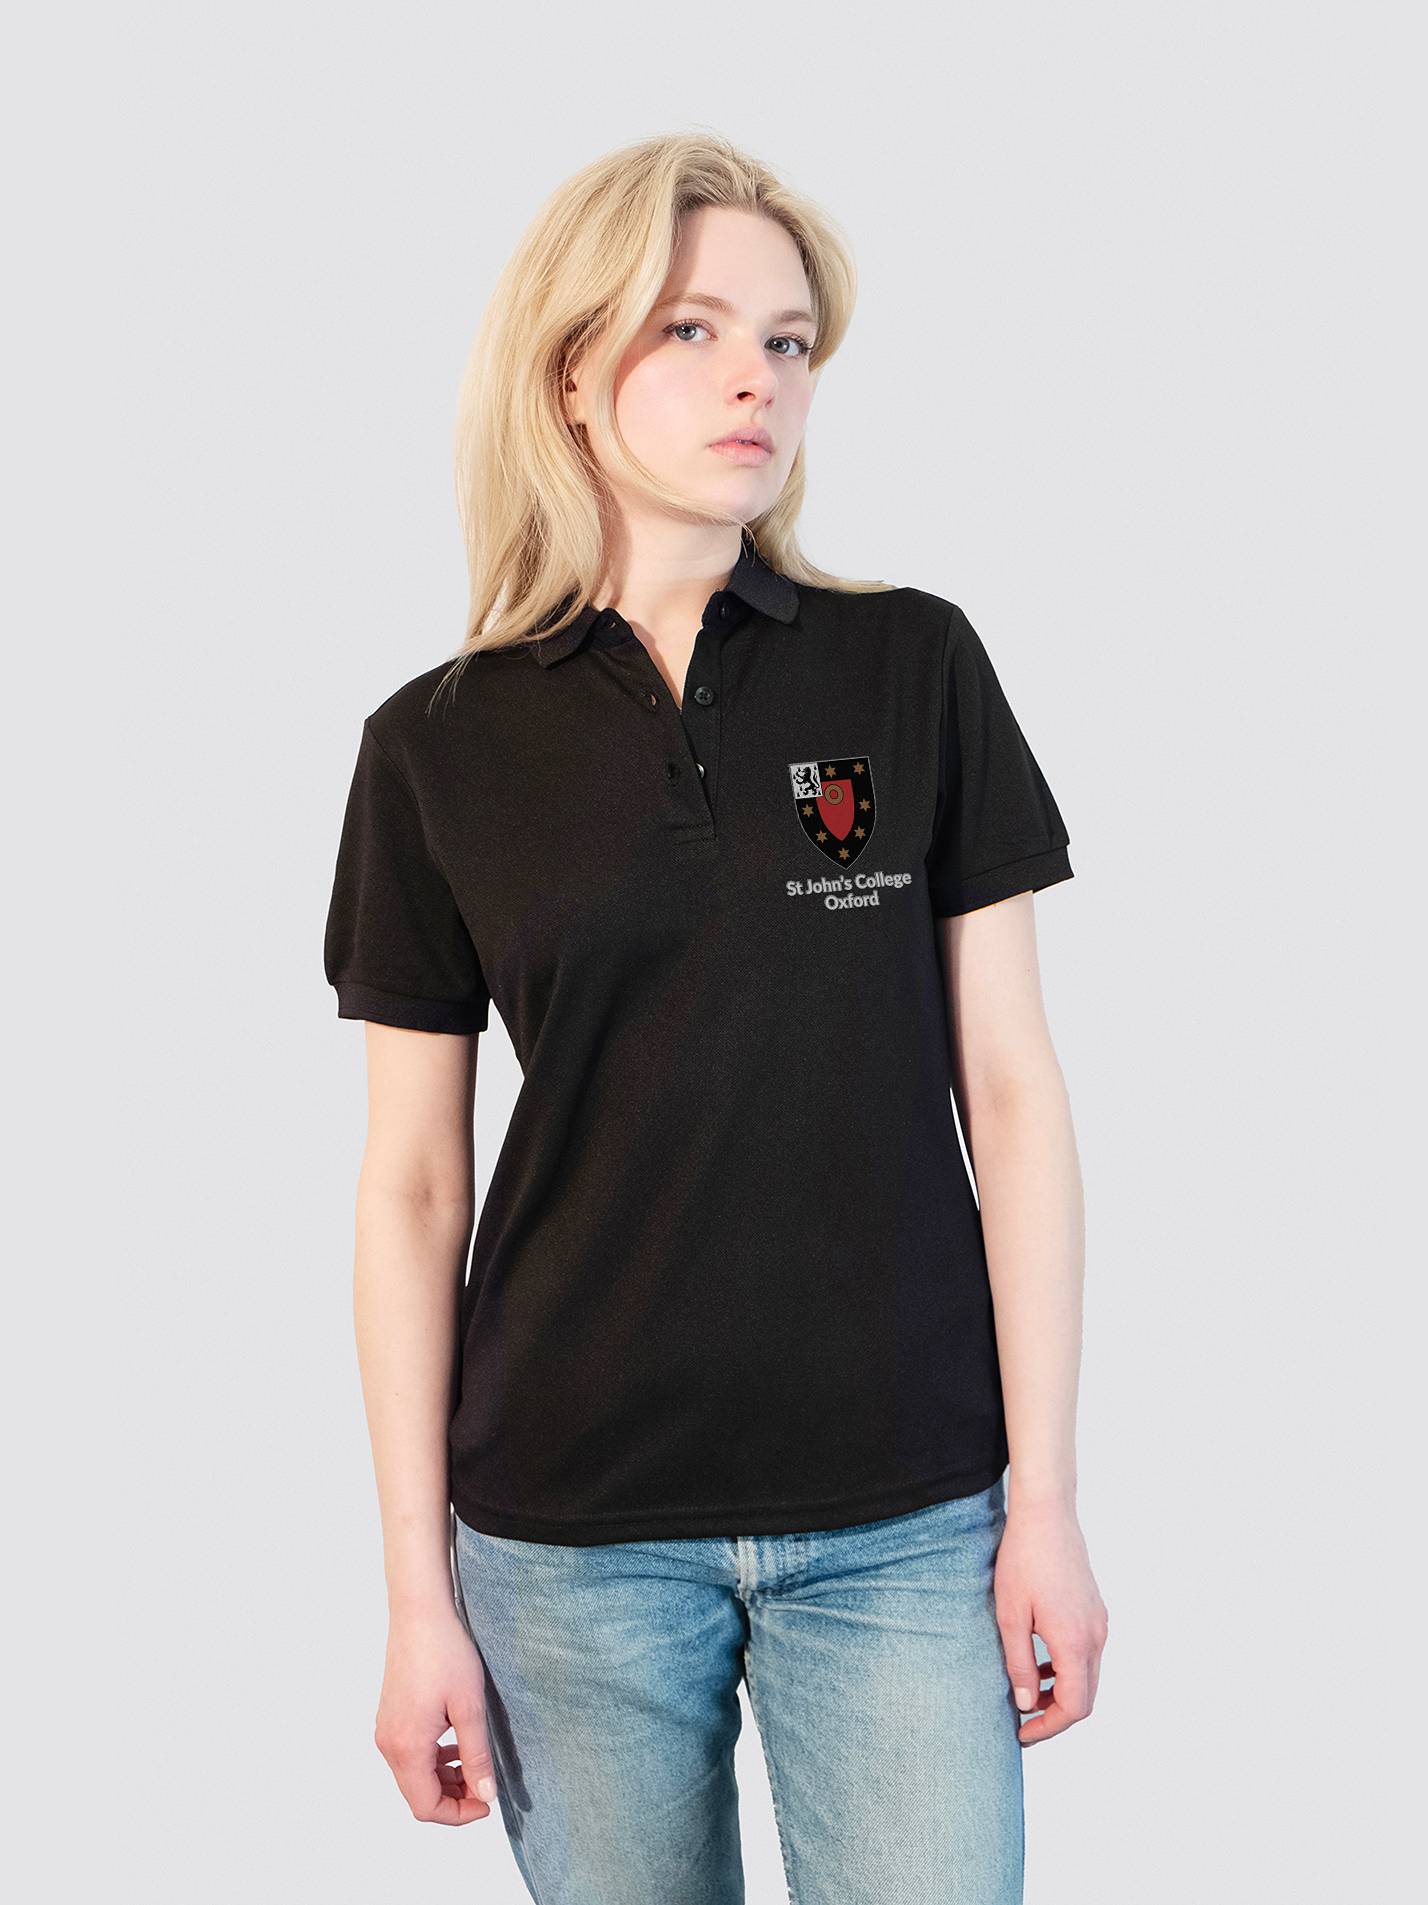 St John's College Oxford JCR Sustainable Ladies Polo Shirt